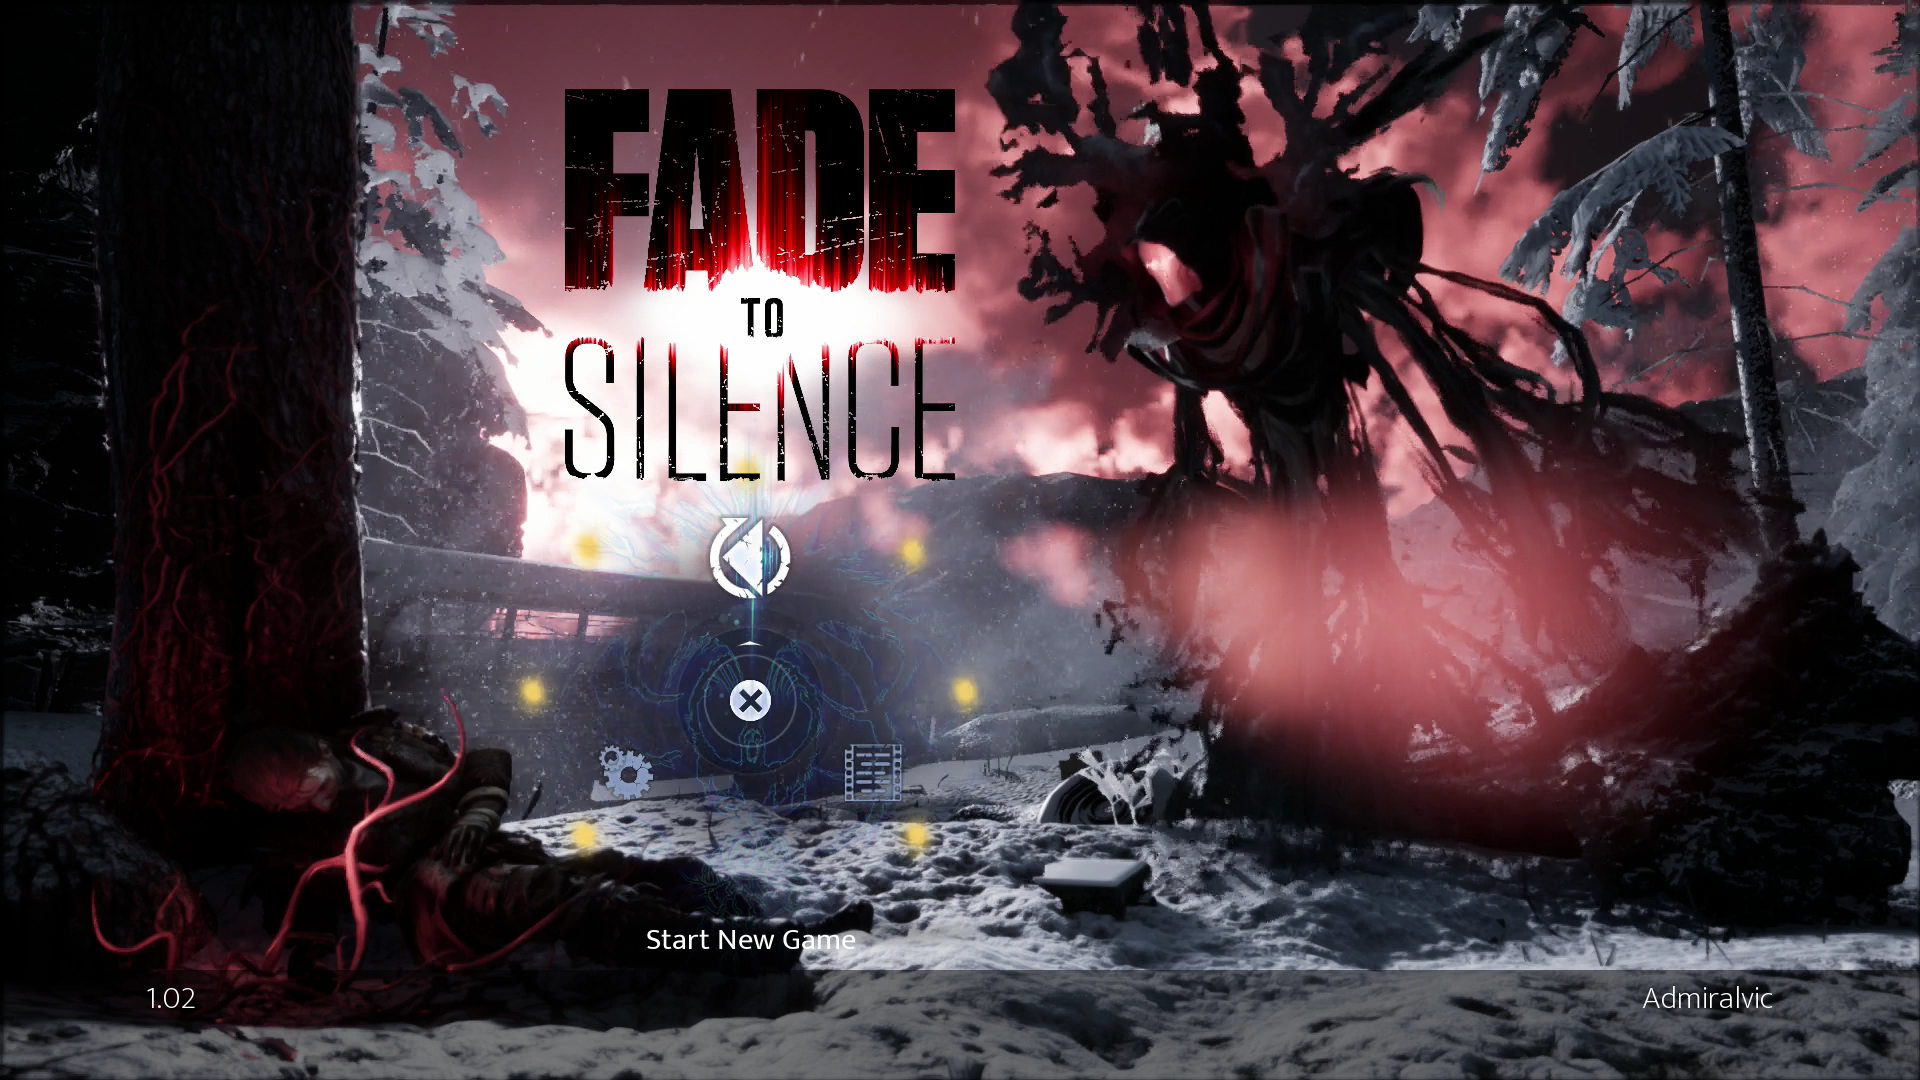 Fade to Silence Review